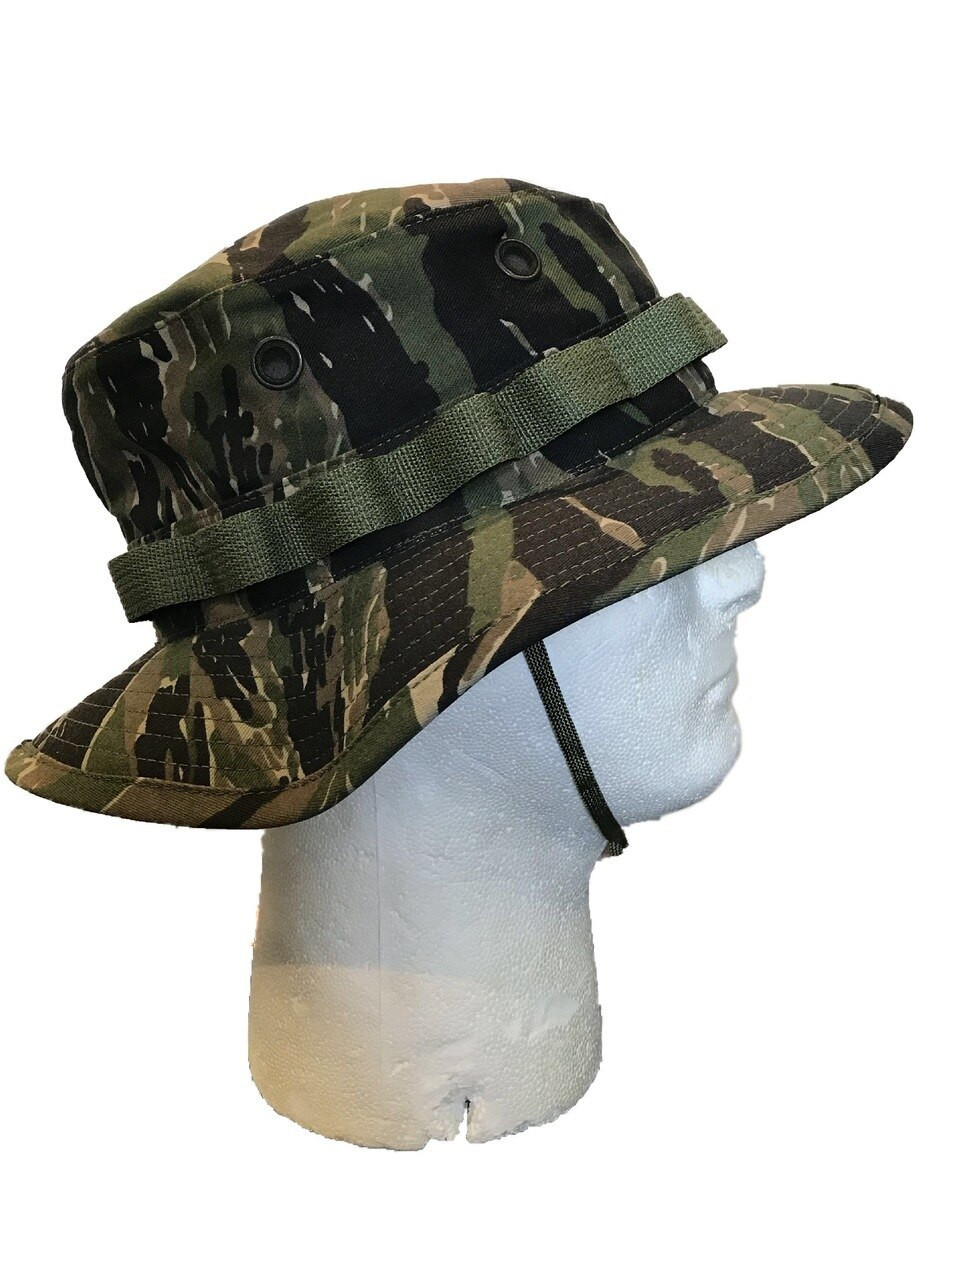 Original Military Issue Boonie Bush Hat 50/50 Nylon Cotton Made in USA -  SGT TROYS